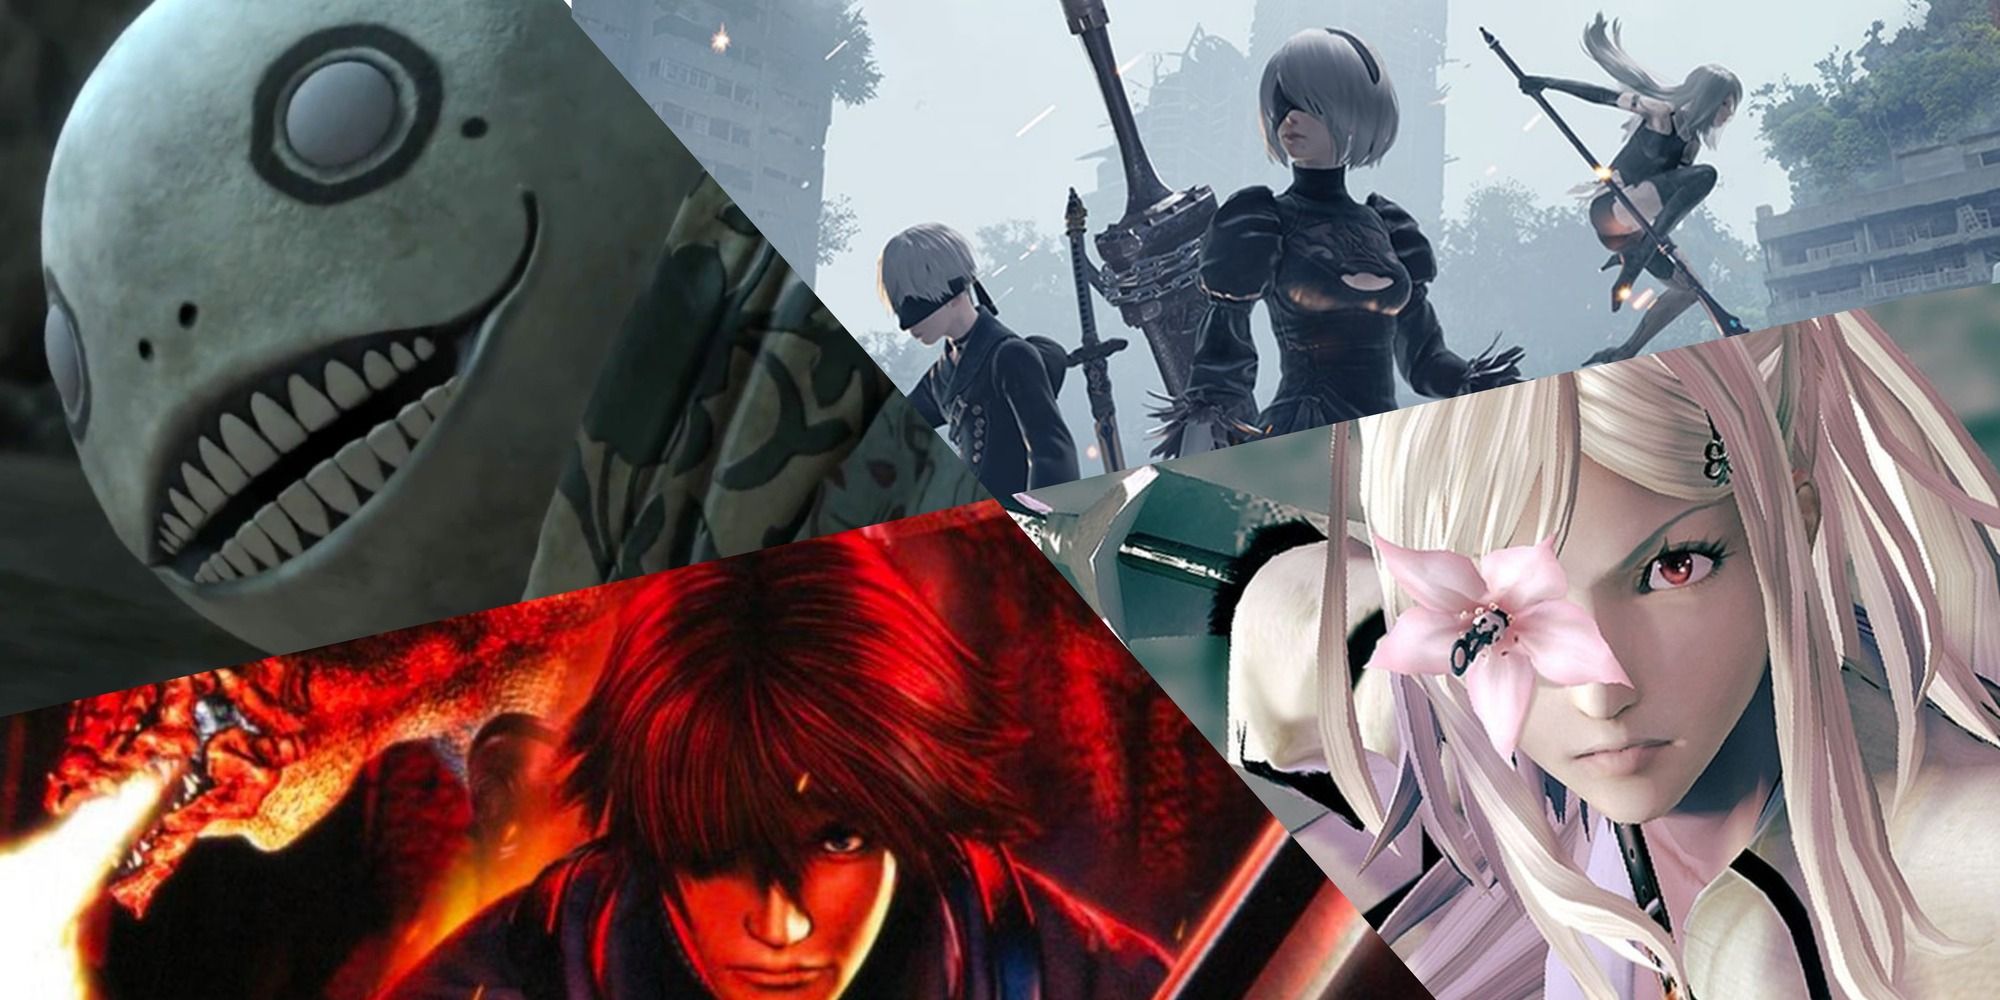 Drakengard and NieR series cover photo containing Emil 9S 2B A2 Caim and Zero